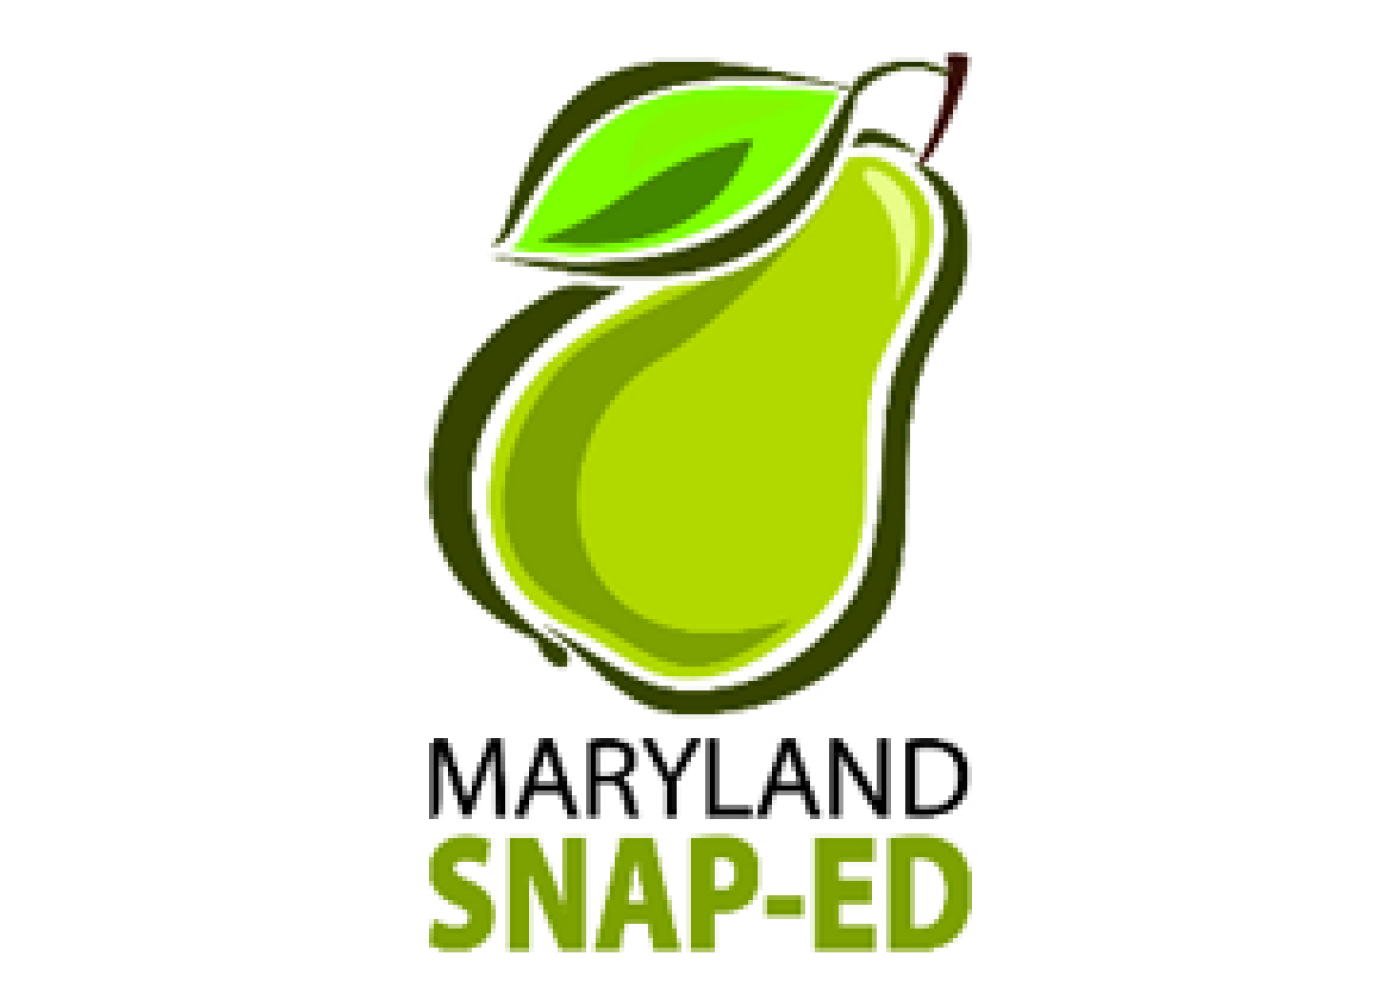 Maryland SNAP-Ed with an drawing of a pear